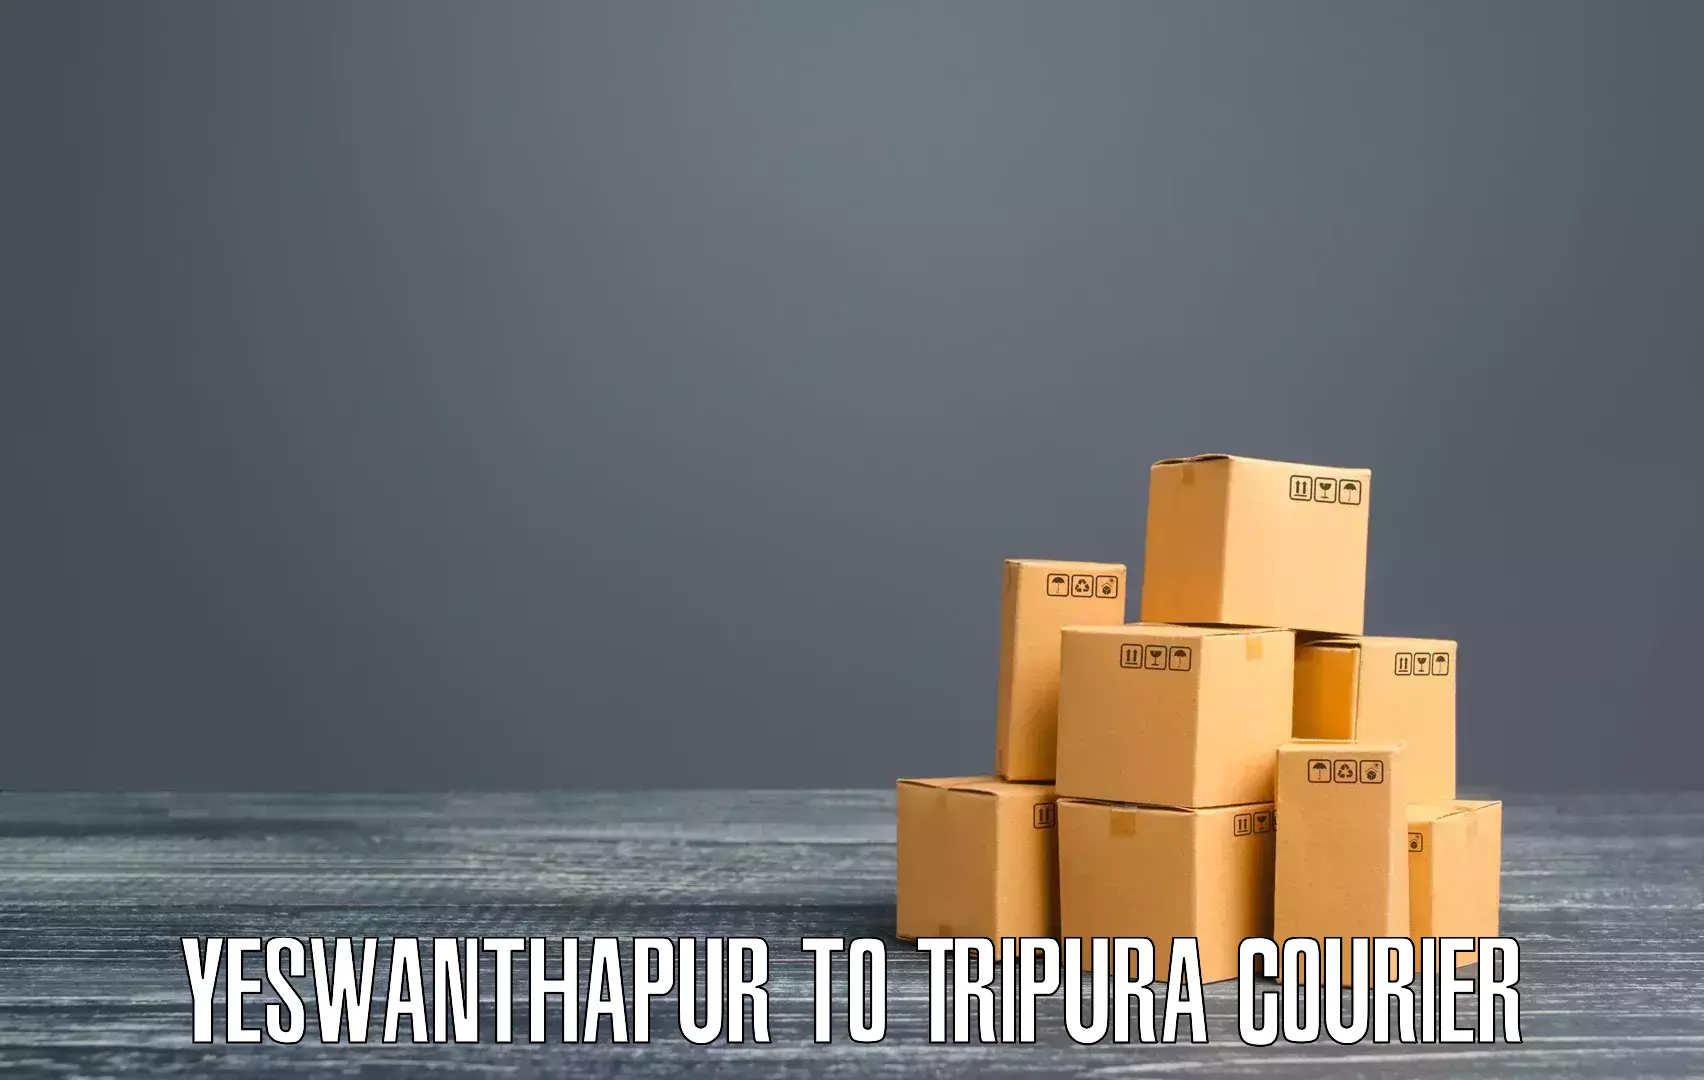 End-to-end delivery Yeswanthapur to Tripura